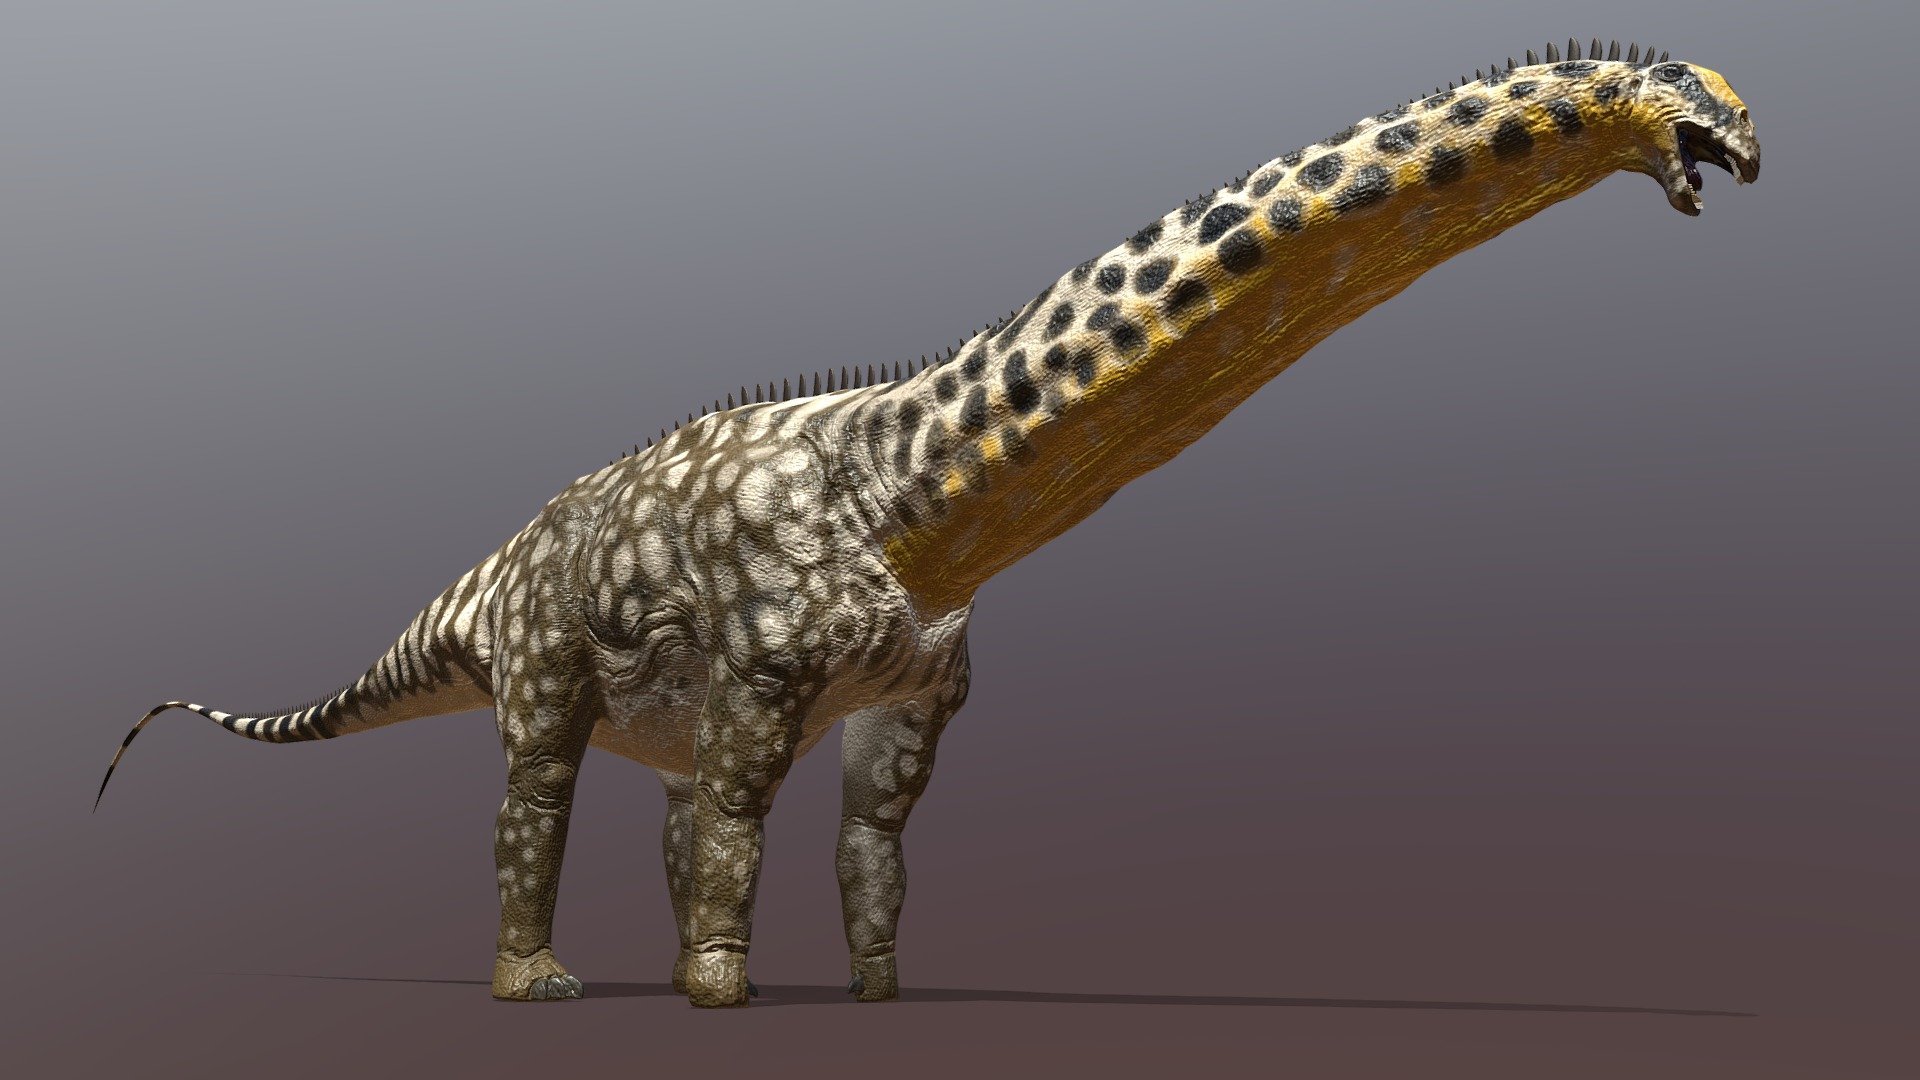 My version of the classic sauropod dinosaur, Brontosaurus excelsus. I made this 3D model using Maya, ZBrush, and Substance Painter.

For a great skeletal drawing of this animal, check out Scott Hartman's website: https://www.skeletaldrawing.com/sauropods-and-kin/apatosaurus-excelsus - Brontosaurus excelsus - 3D model by Nathan E. Rogers (@nathan.rogers) 3d model